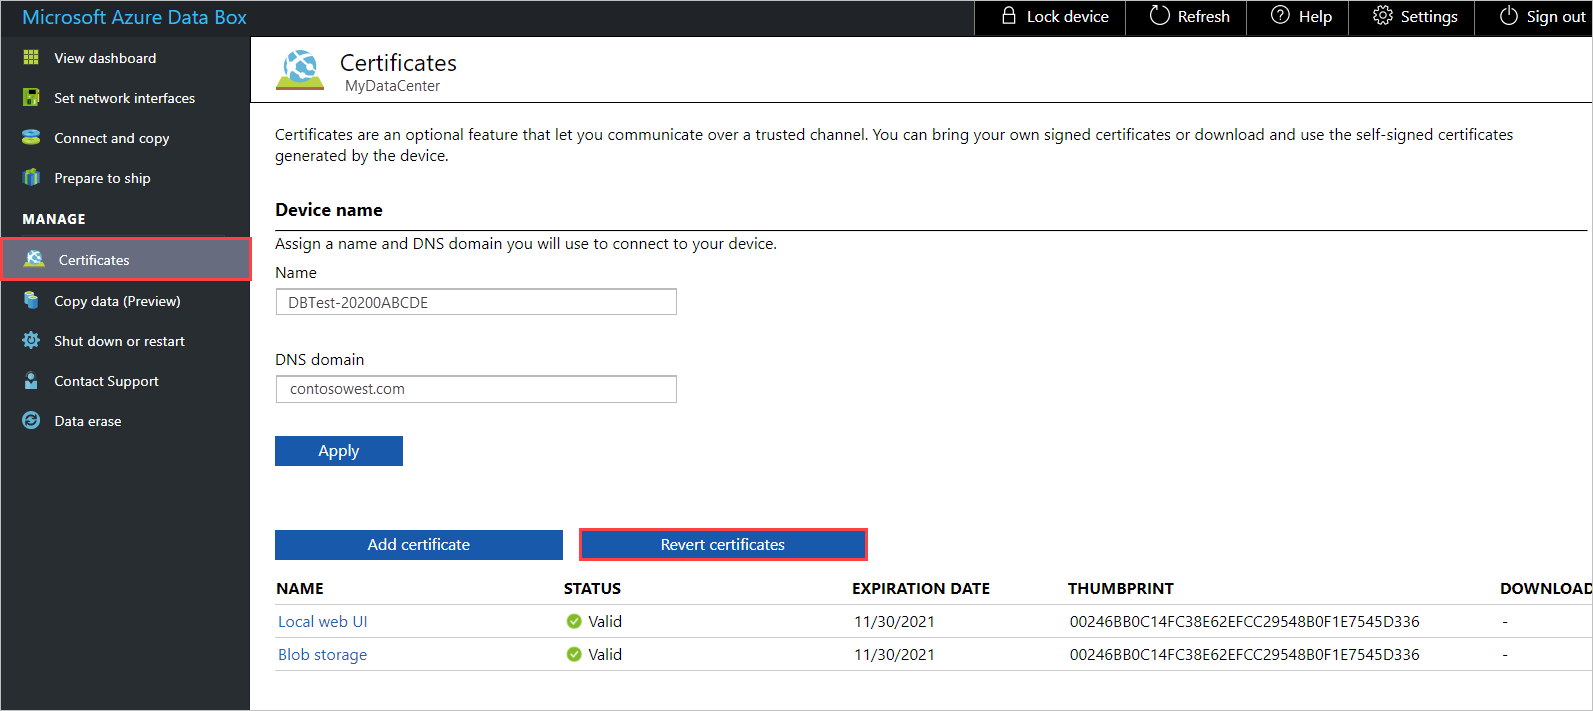 Revert certificates option in Manage Certificates for a Data Box device